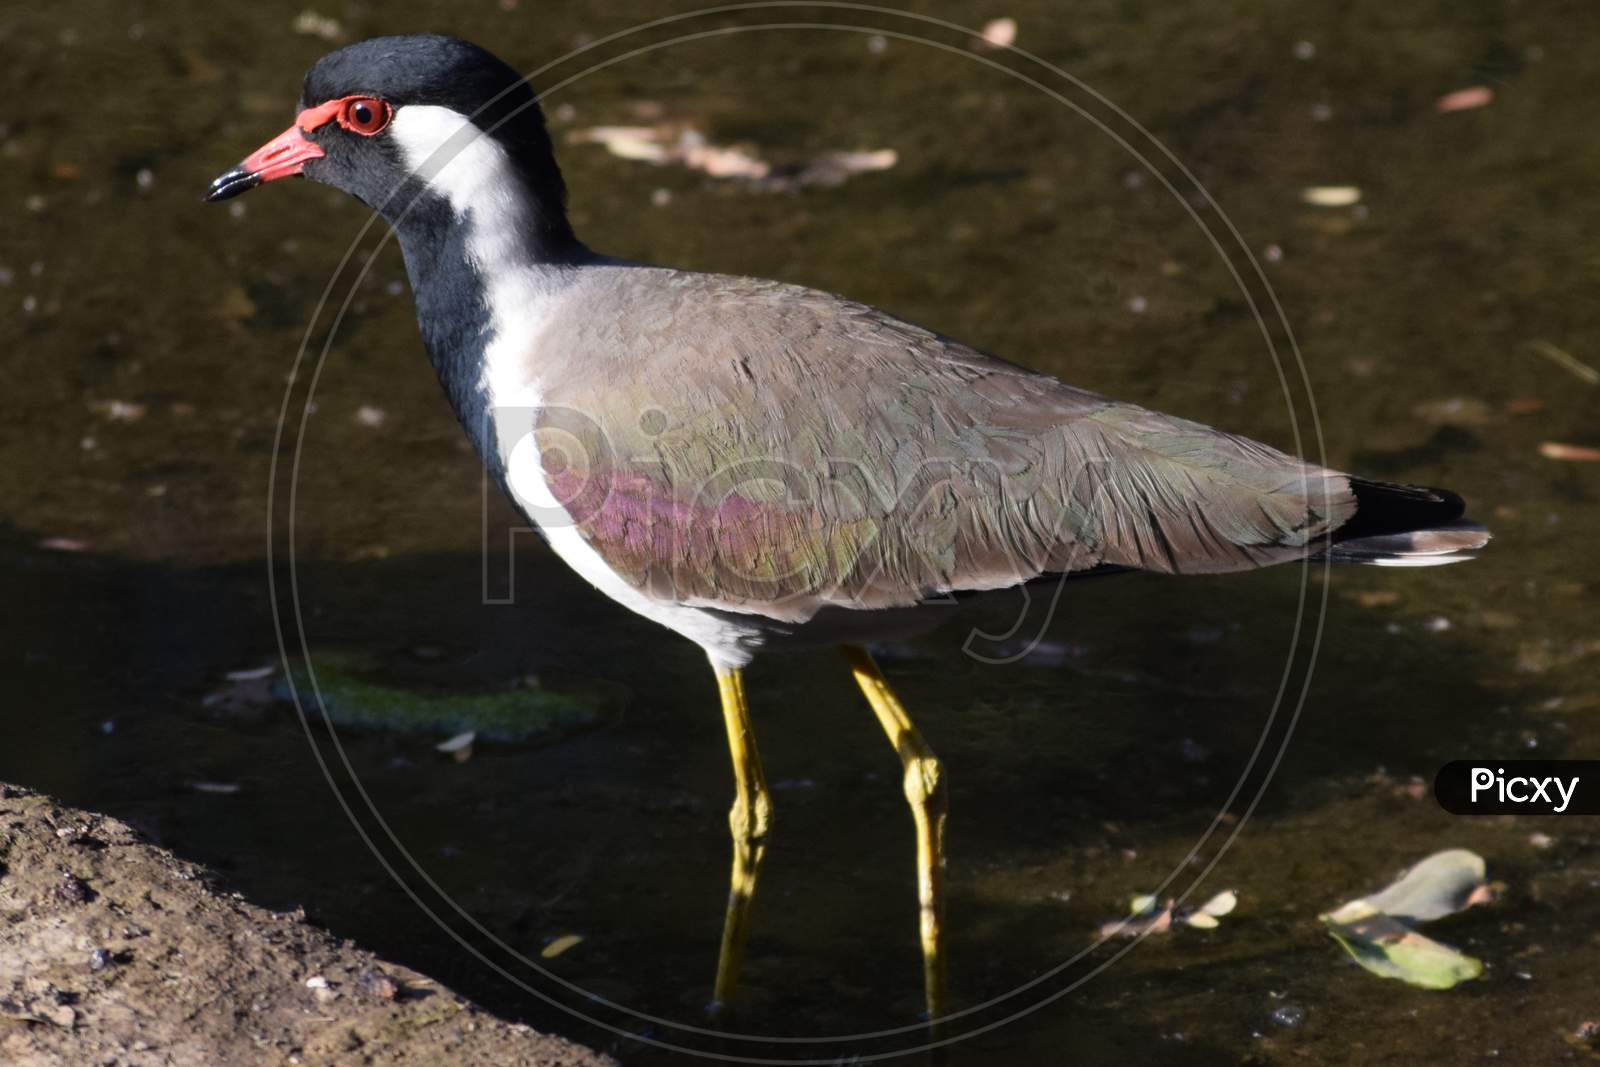 red-wattled lapwing is an Asian lapwing or large plover, a wader in the family Charadriidae.